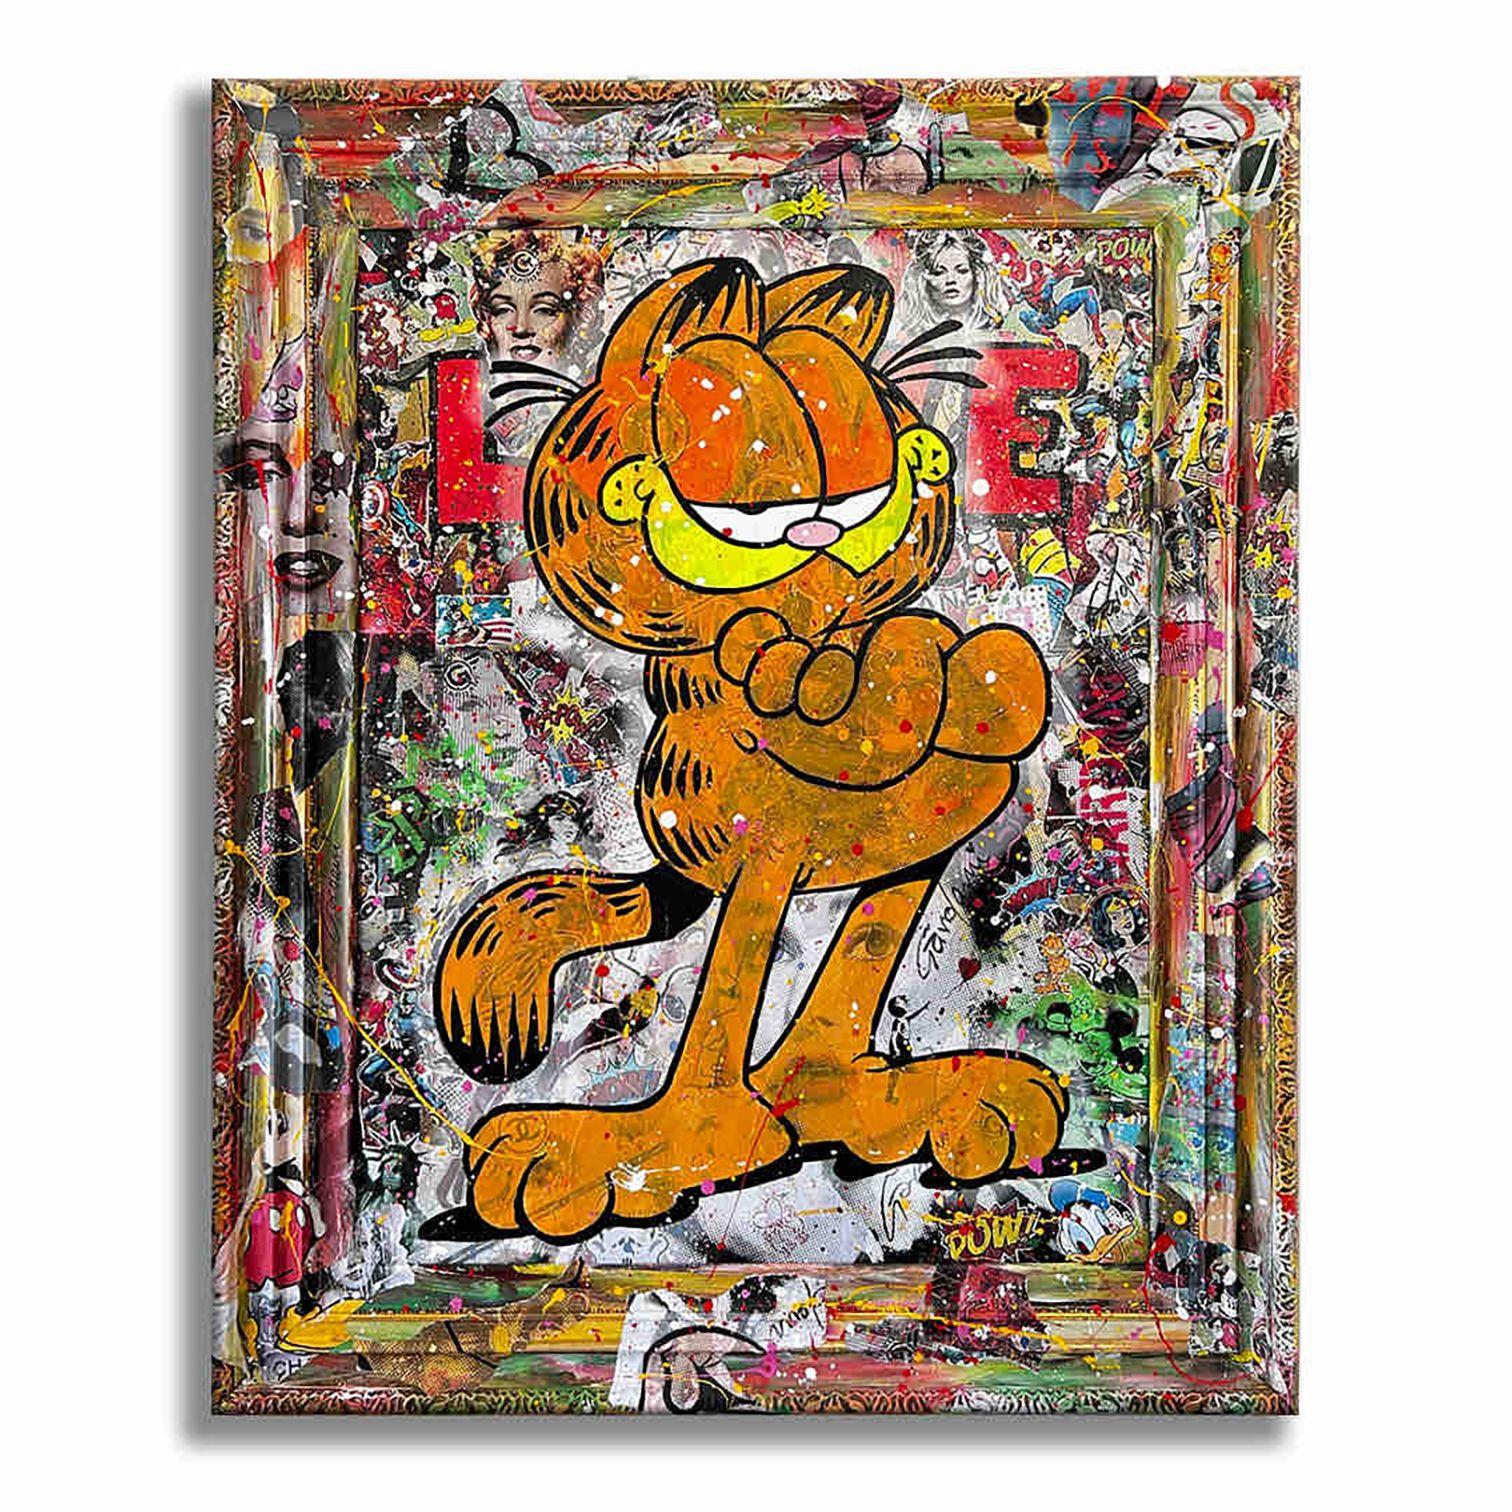 Garfield world â€“ Original Painting on Canvas, Painting, Acrylic on Canvas For Sale 3